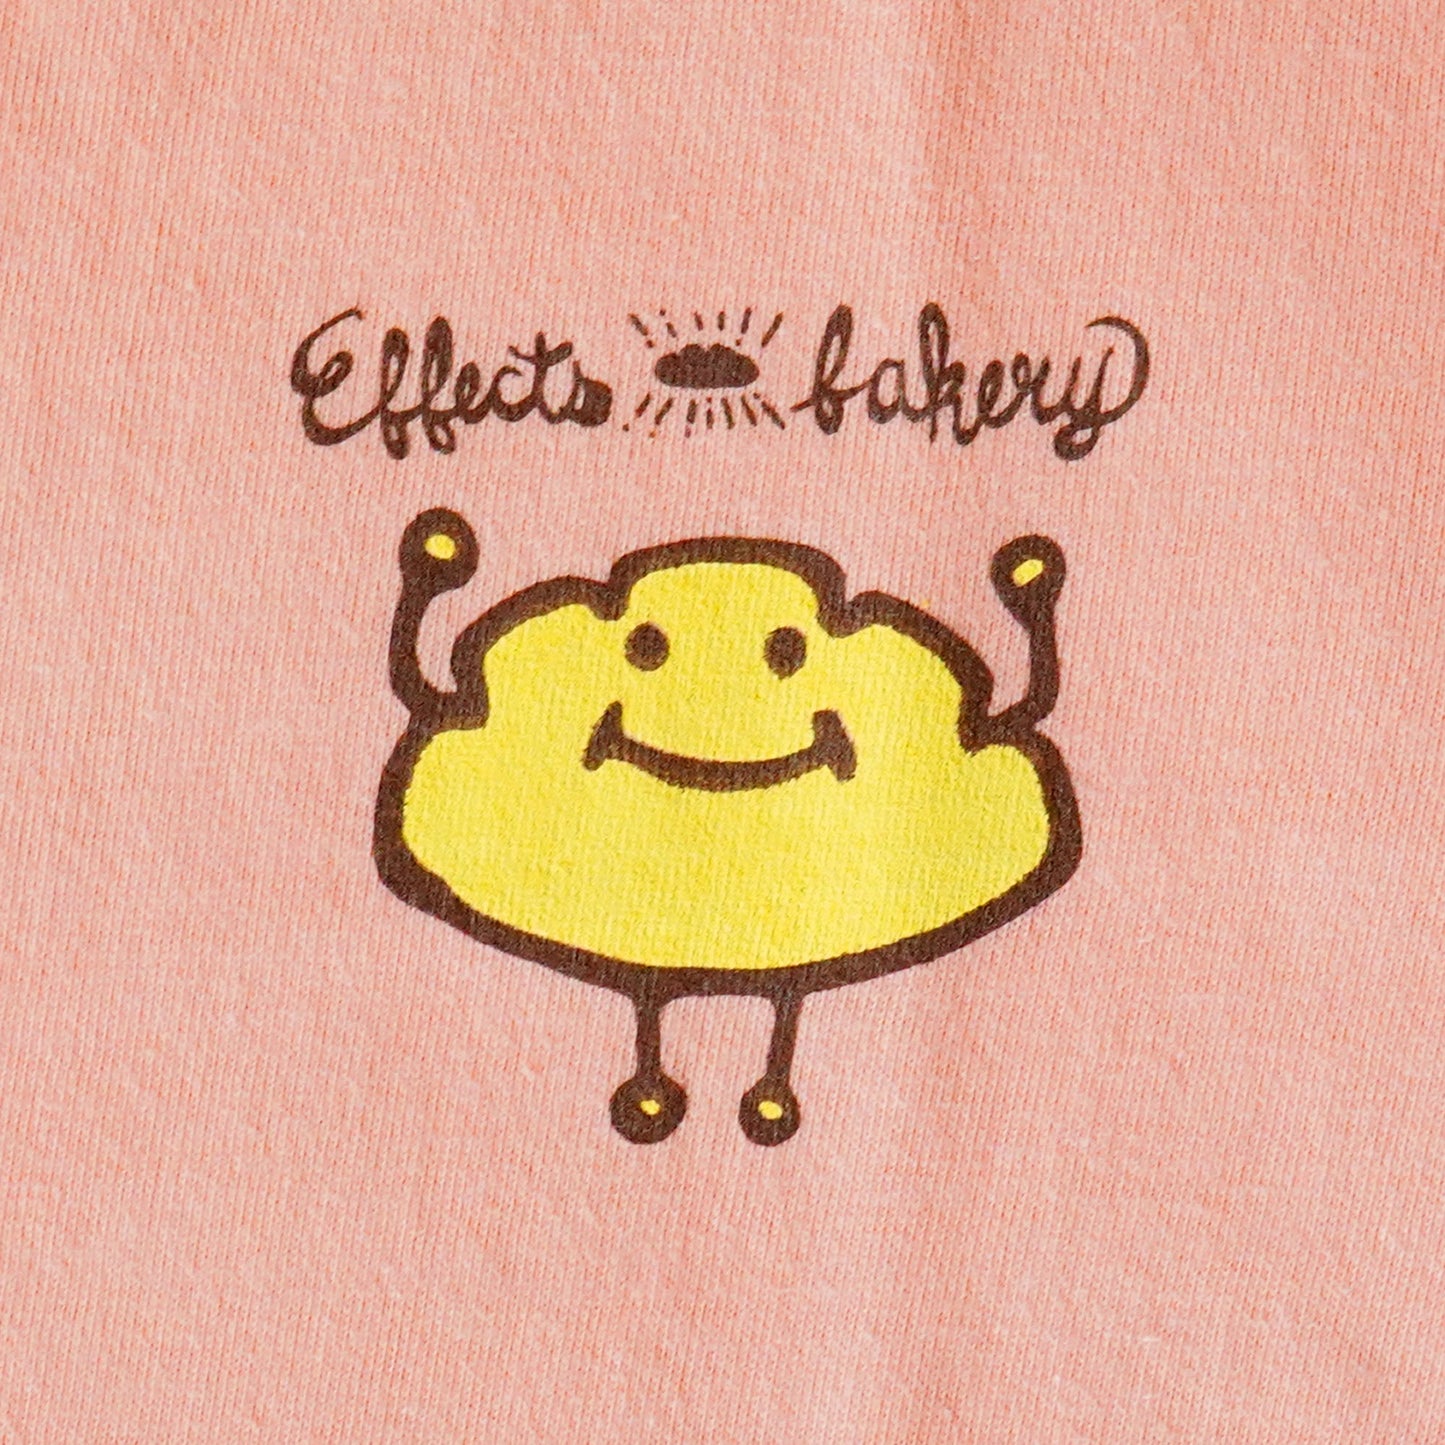 Effects Bakery/Cream Pan Tシャツ クリームパンピンク